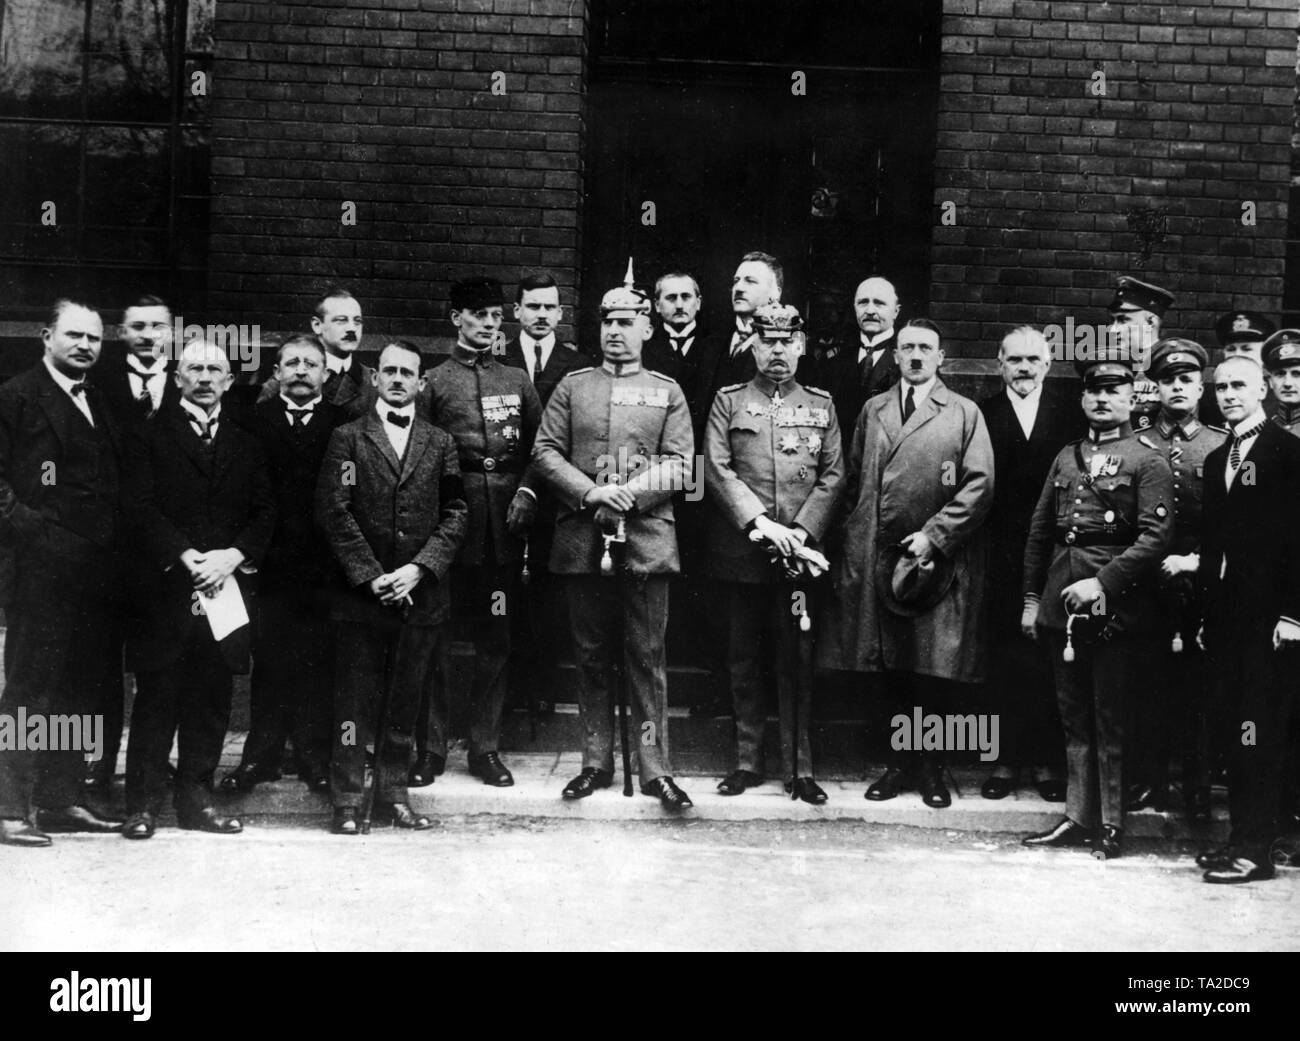 The captured putschists after the failed Beer Hall Putsch in Munich.From left to right: Freikorps leader Dr. Friedrich Weber (in uniform) Lieutenant Colonel Hermann Kriebel (in uniform with spiked helmet), General Erich Ludendorff, Adolf Hitler, Captain Ernst Roehm (in uniform, hand on sword hilt), Lieutenant Colonel Wilhelm Brueckner (in uniform, behind Roehm, in profile), Lieutenant Colonel Heinz Pernet (behind Roehm). Stock Photo